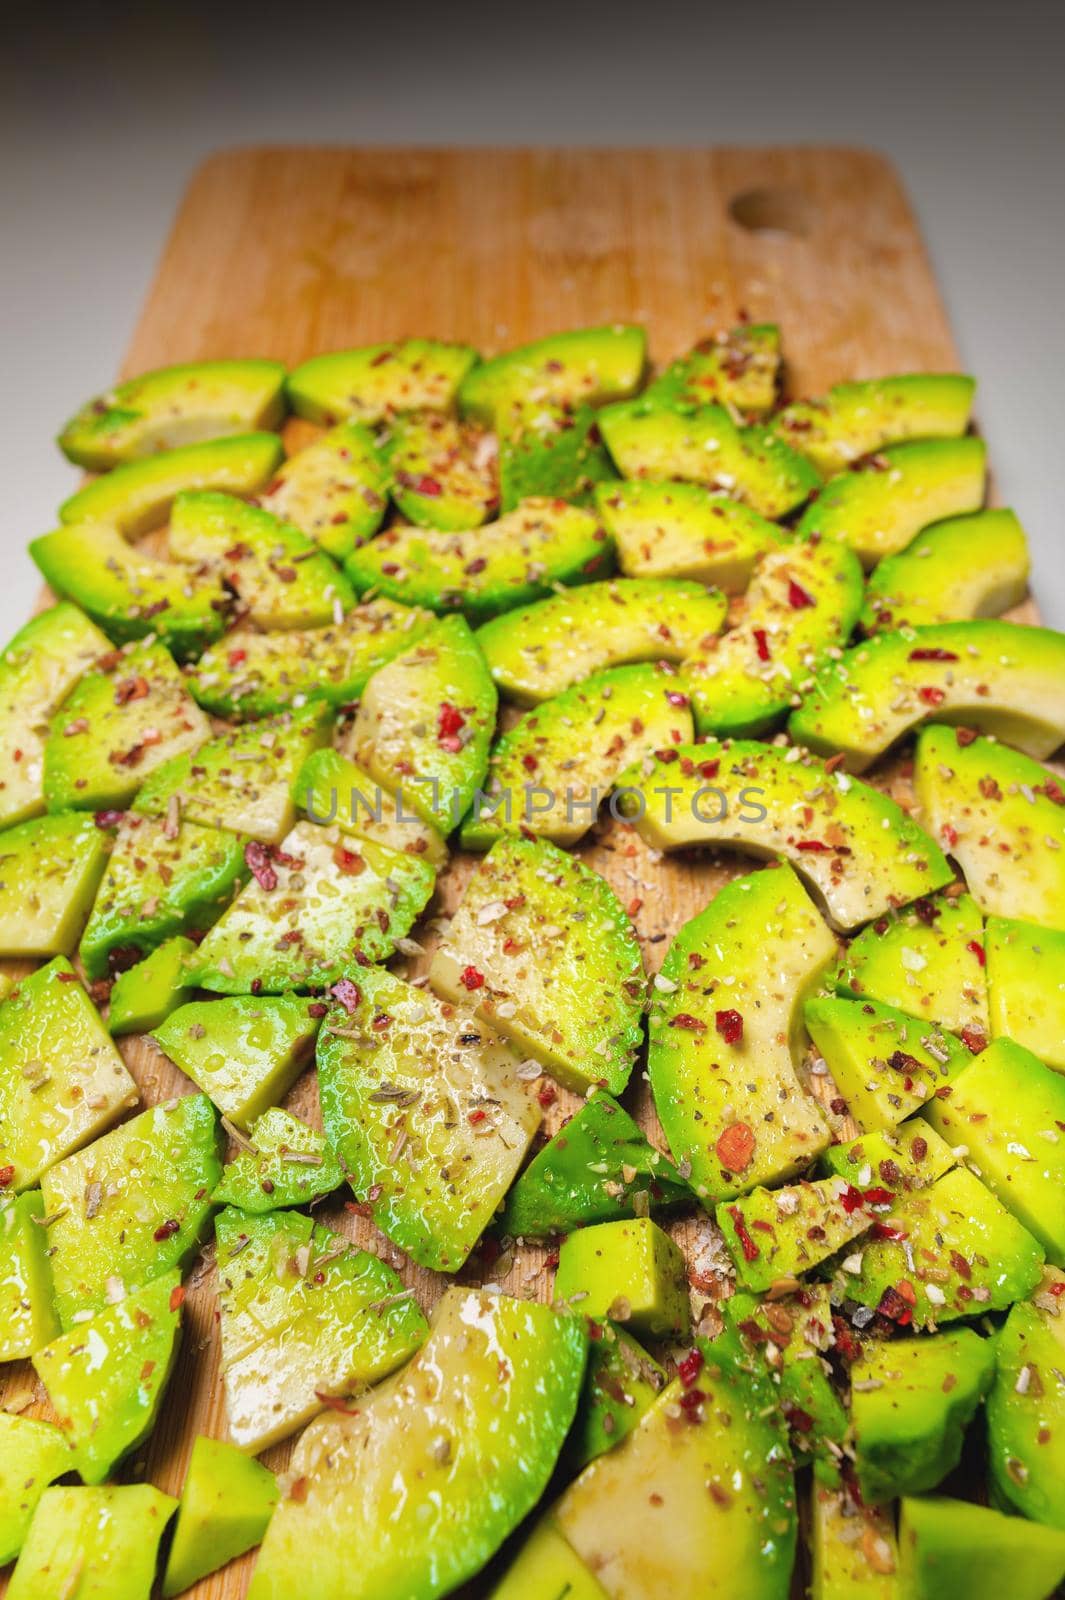 Avocado slices on a wooden textured background sprinkled with spices, bright accent. View from above.